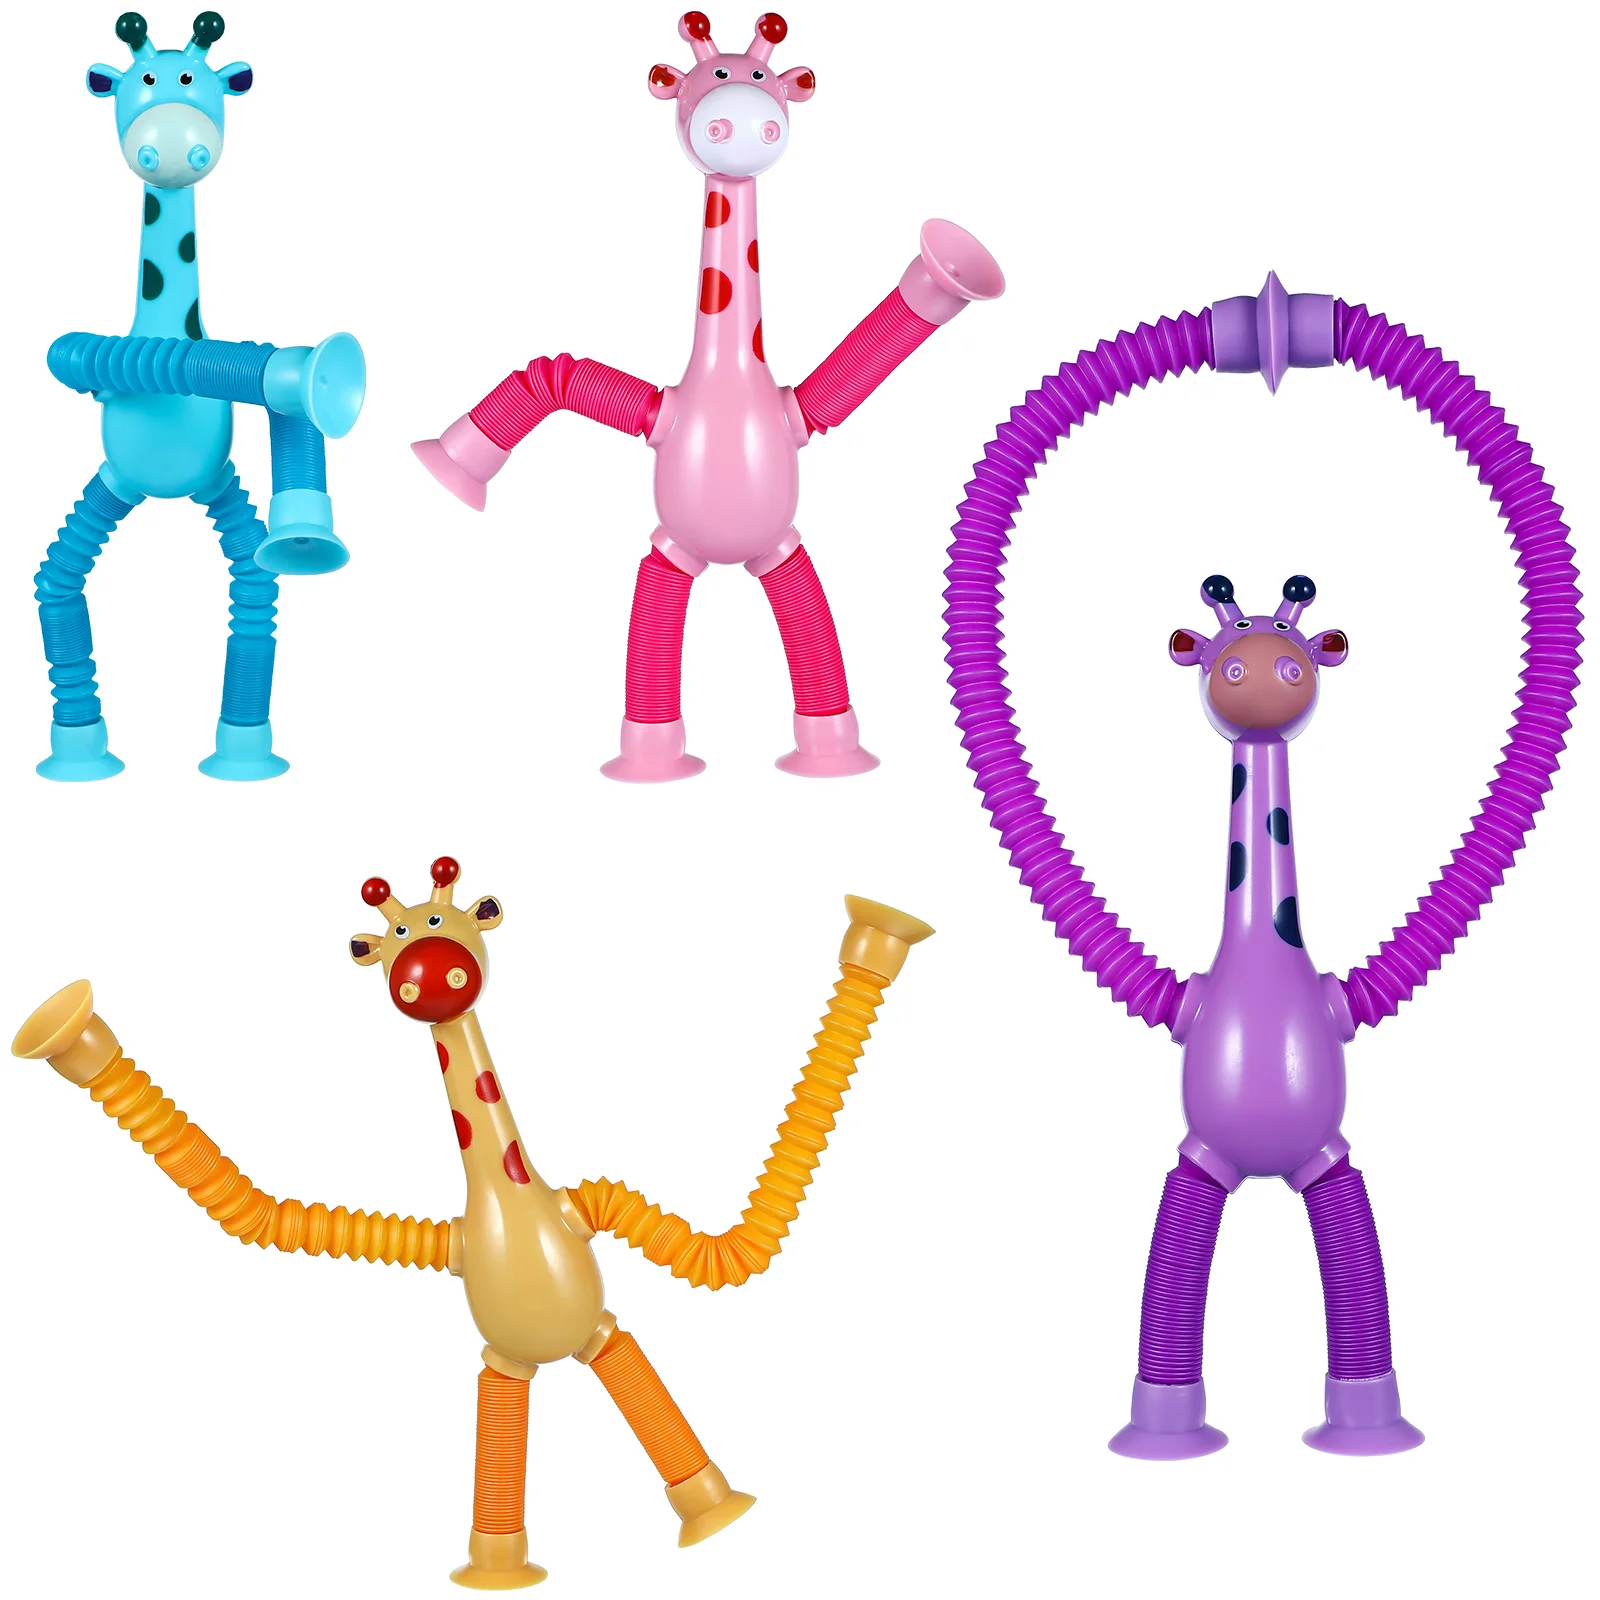 

Toy Sensory Tubes Giraffe Toys Telescopic Glowing Shape Changing Animal Models Suction Cup Kids